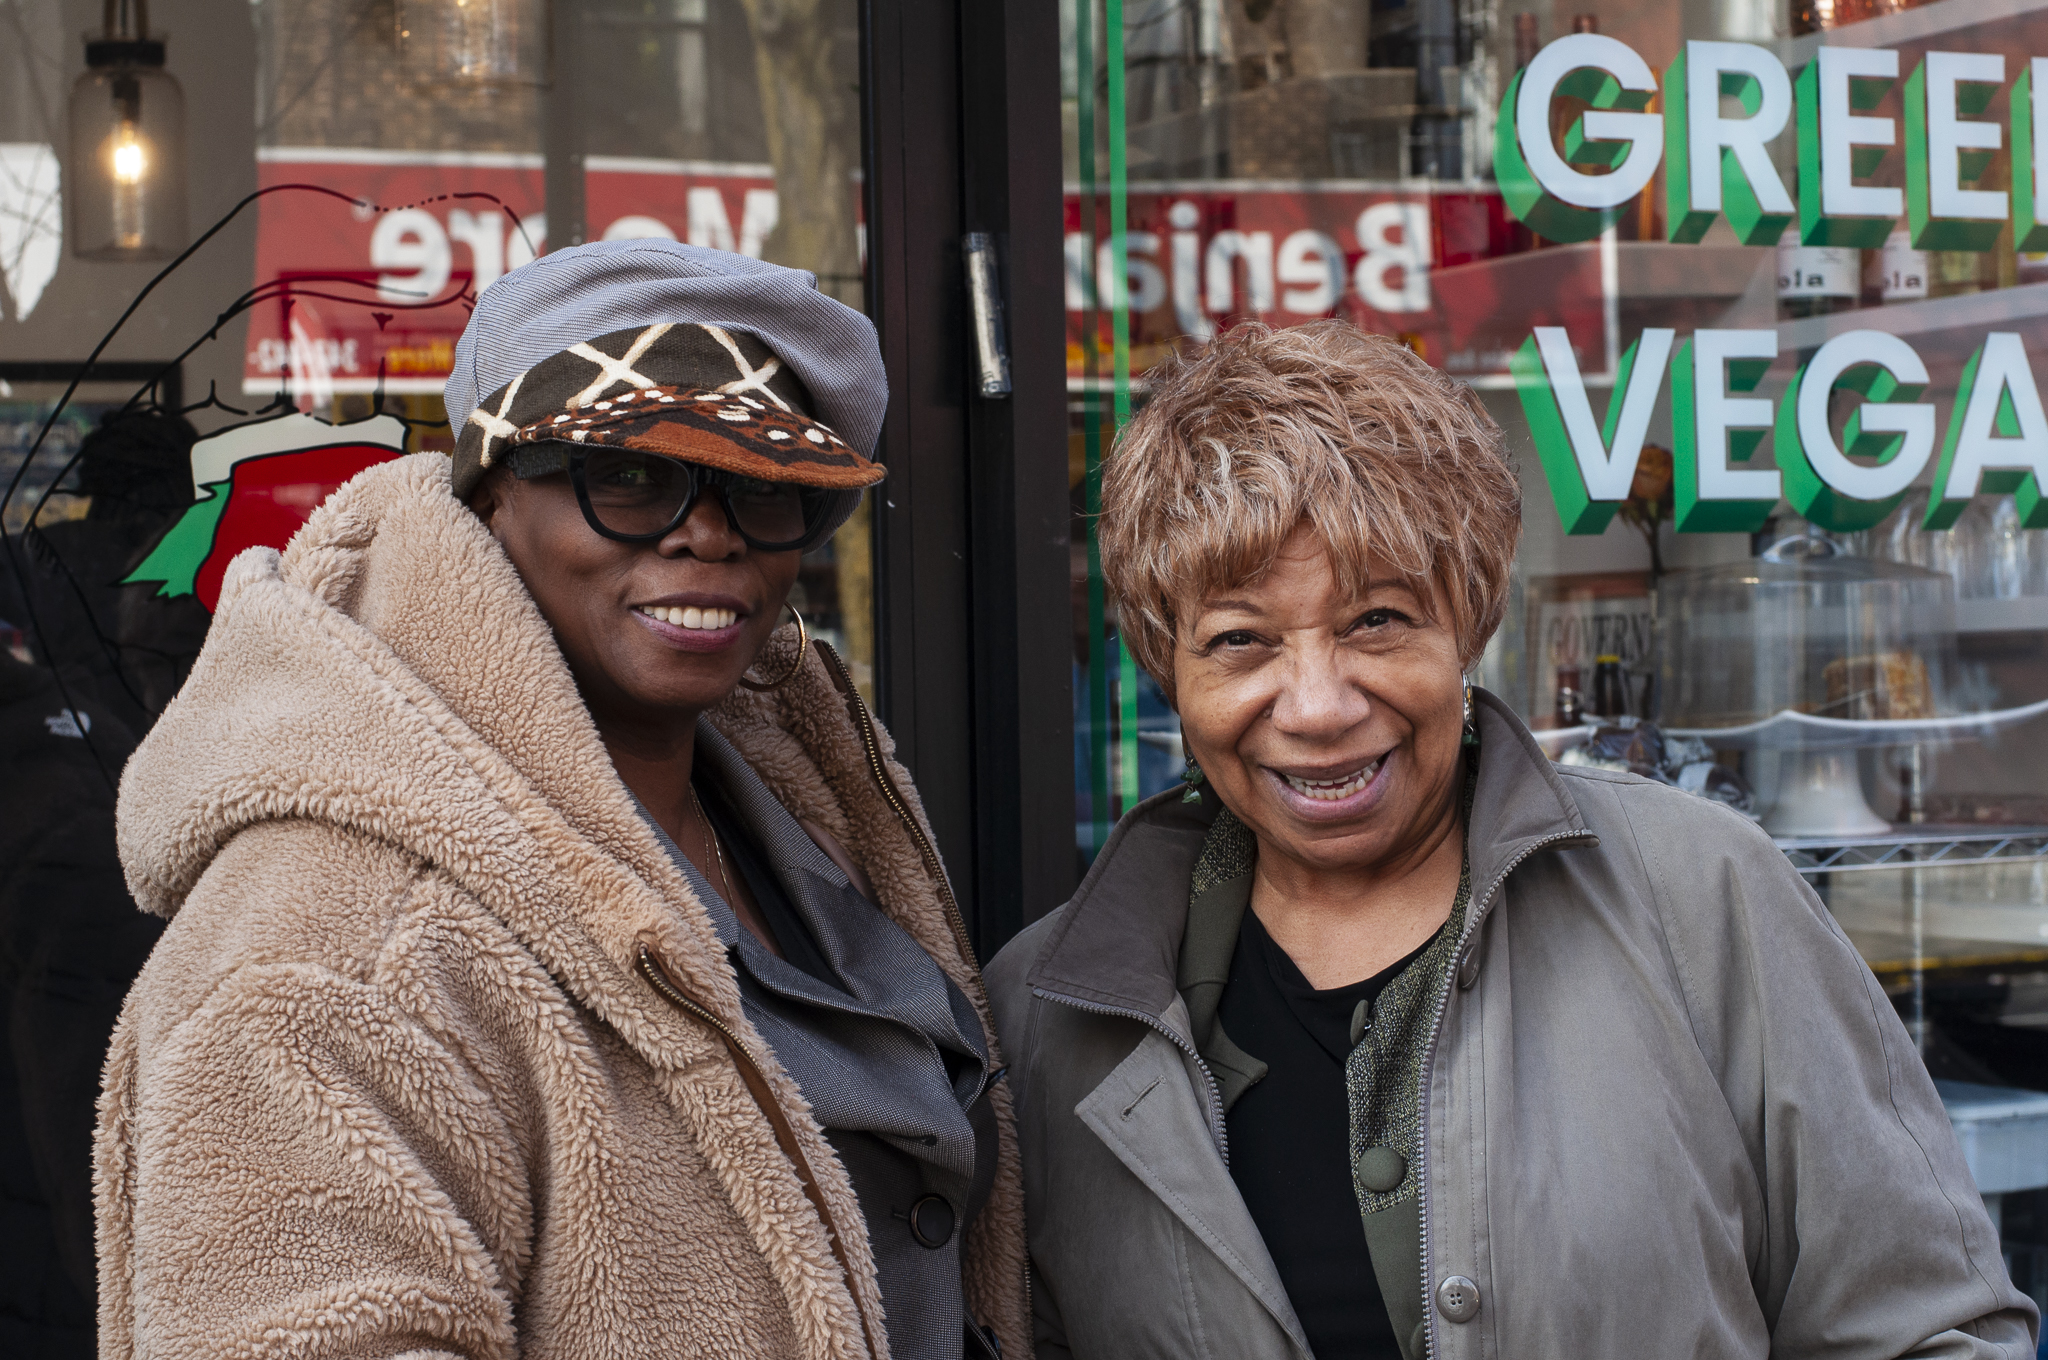 Photograph of two members of the United Order of the Tents bundled up against the cold, standing in front of Greedi Vegan restaurant.